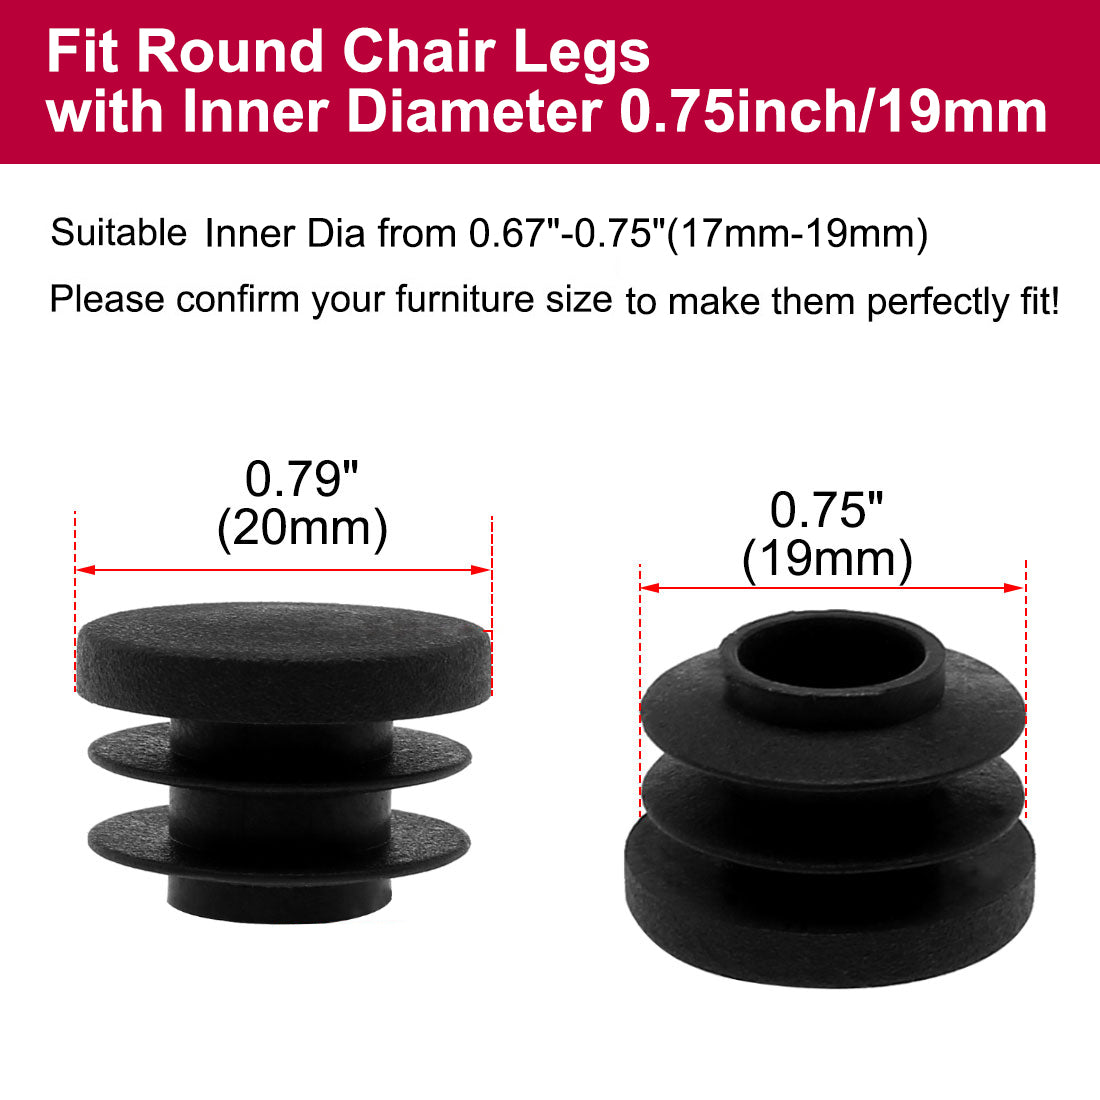 Uxcell Uxcell 5/8" 16mm OD Plastic Round Tube Ribbed Inserts End Cover Caps 18pcs, 0.51"-0.6" Inner Dia, Floor Furniture Chair Desk Protector